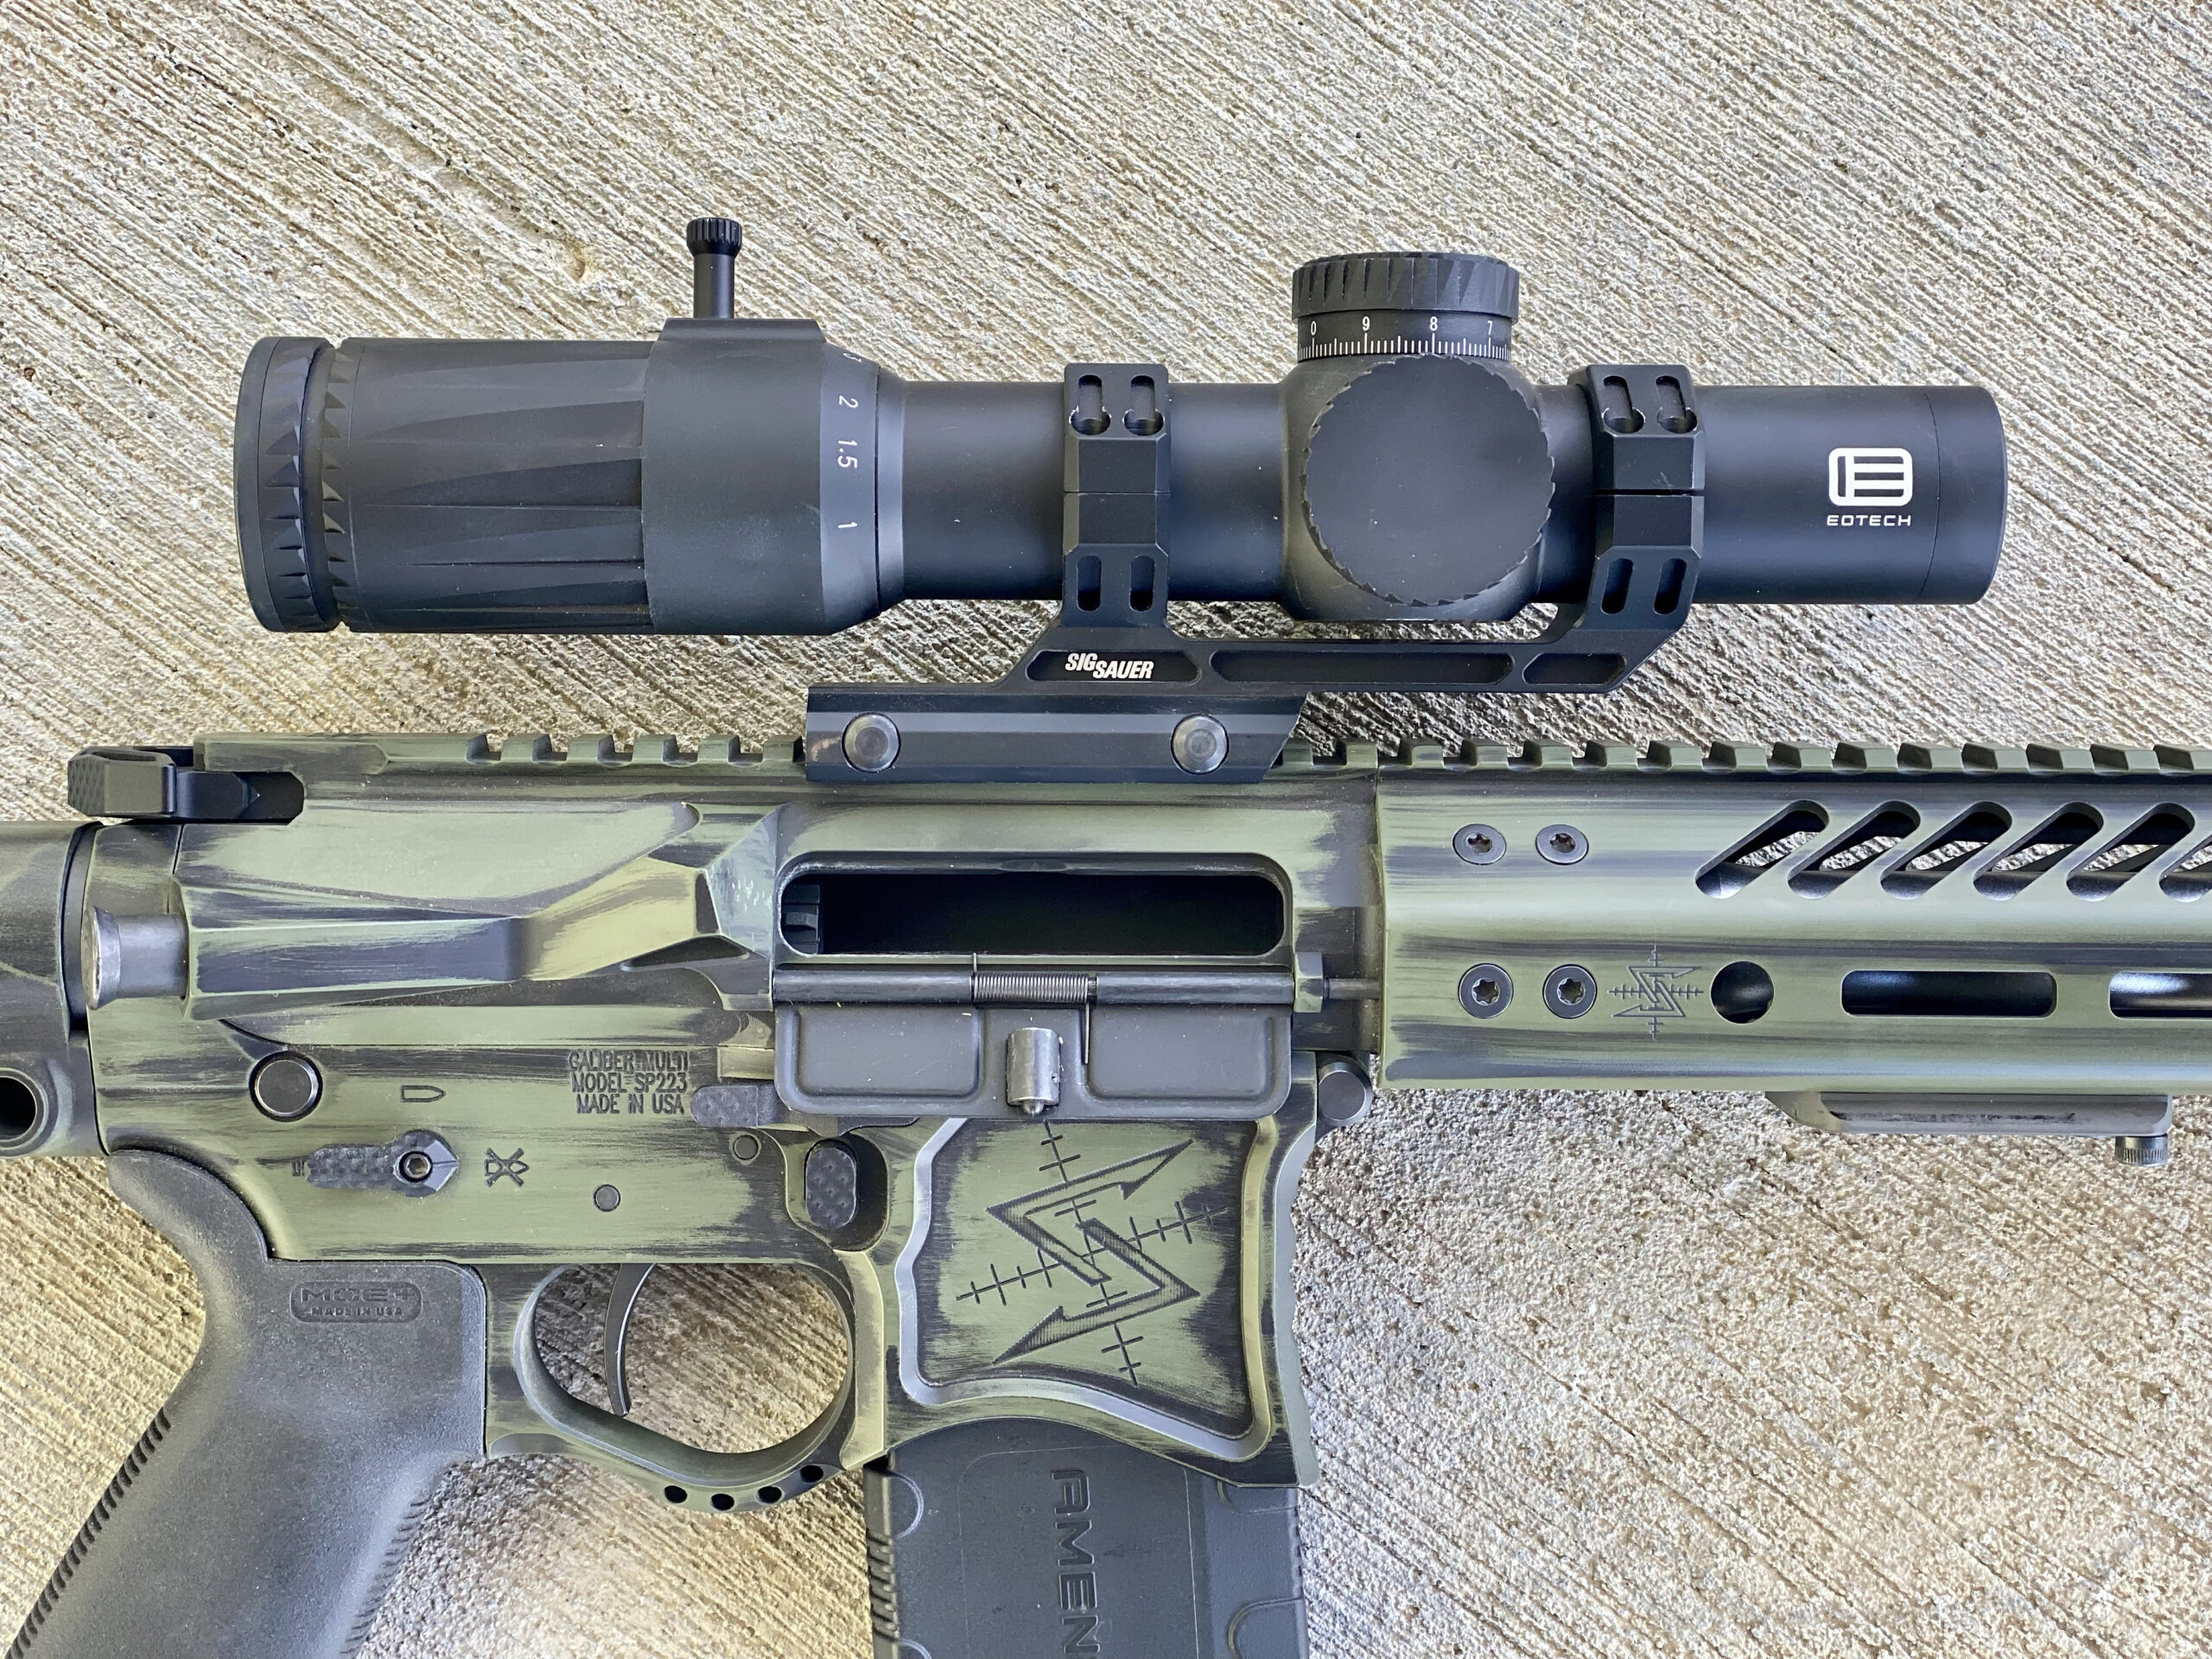 The EOTech Vudu was the best tactical lpvo during testing.